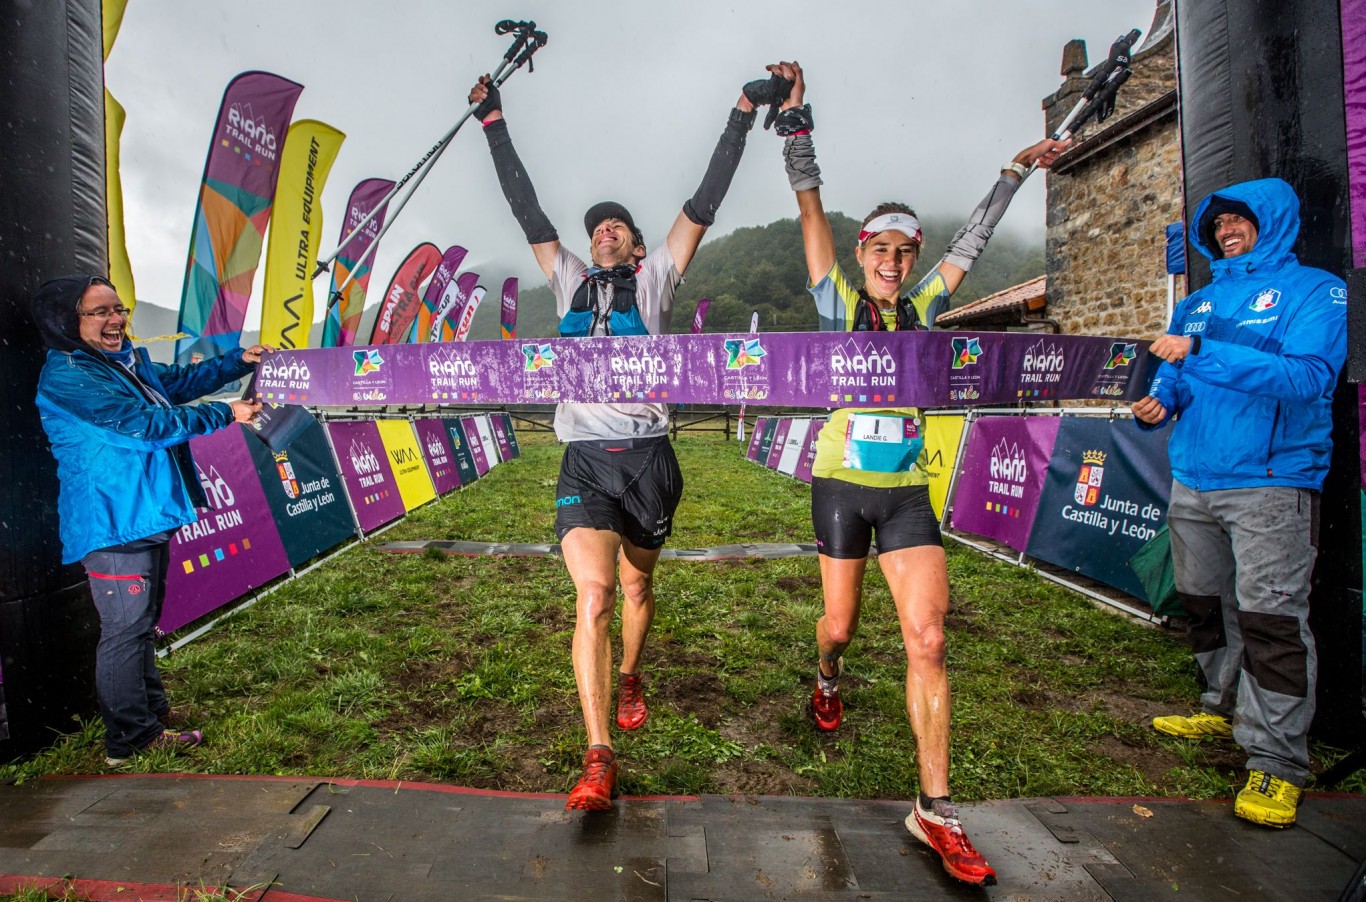 Gold for Greyling Team at Spain's 98km Riaño Trail Run